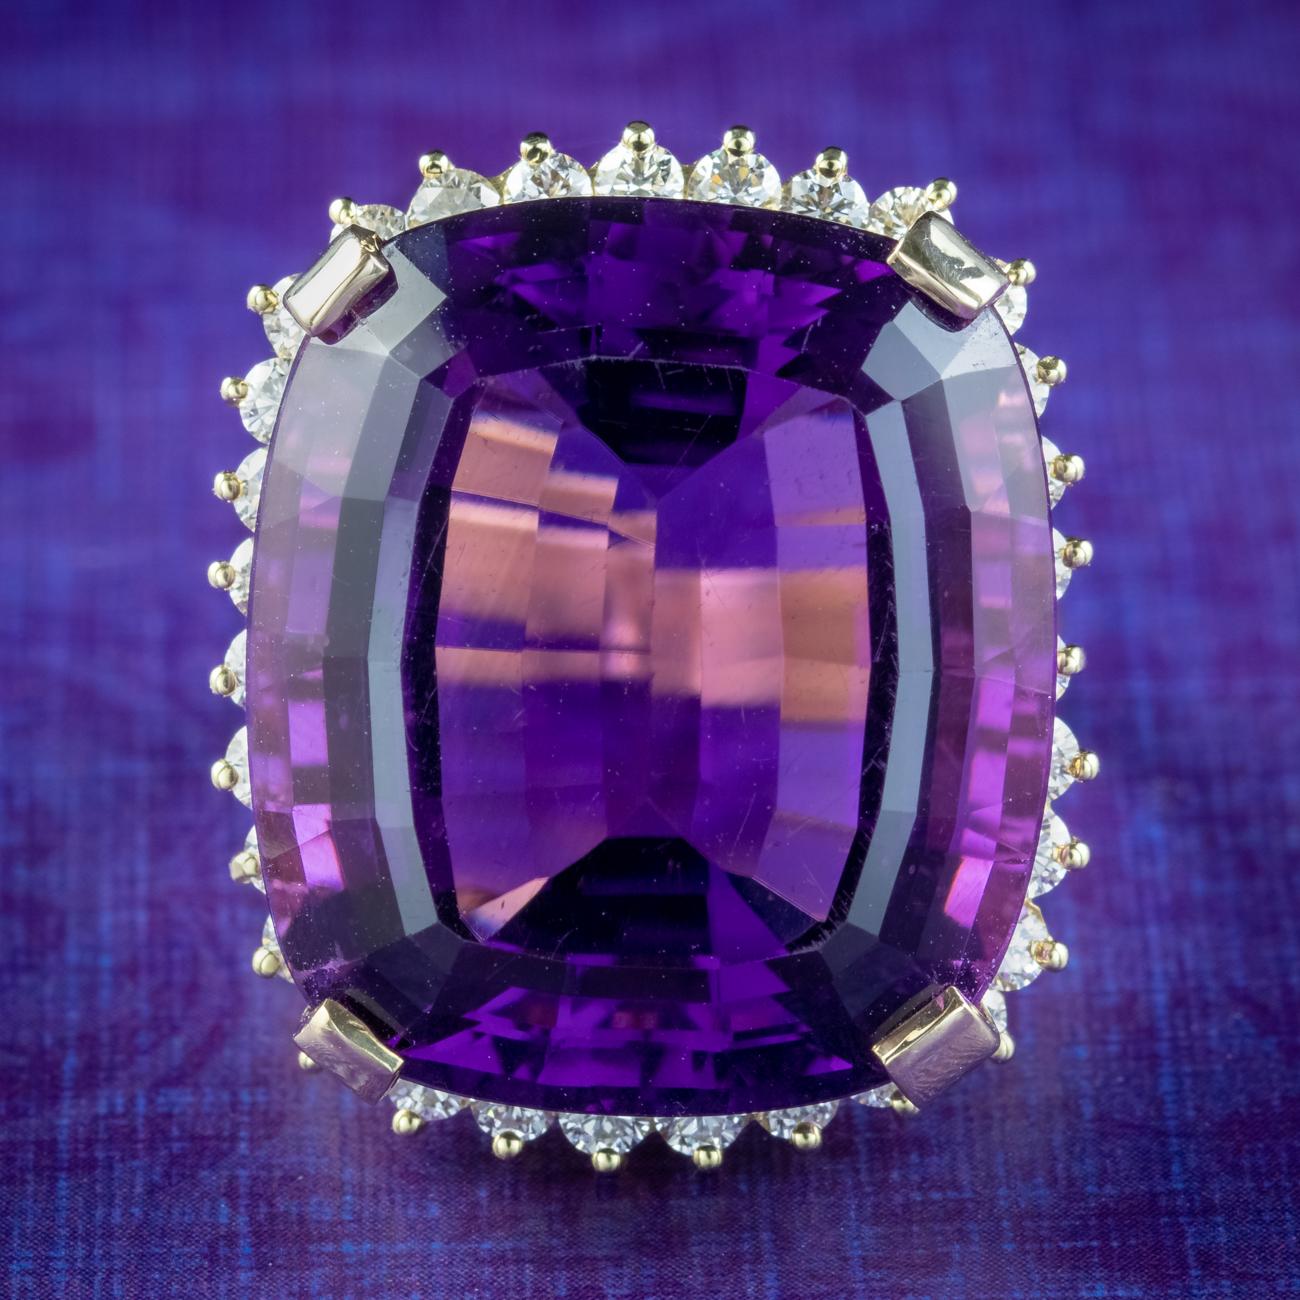 Boasting an enormous cushion cut amethyst, this spectacular cocktail ring was made to be seen! The amethyst weighs an impressive 40 carats (approx.) and has a luxurious, deep purple hue and an array of glistening facets, complemented beautifully by